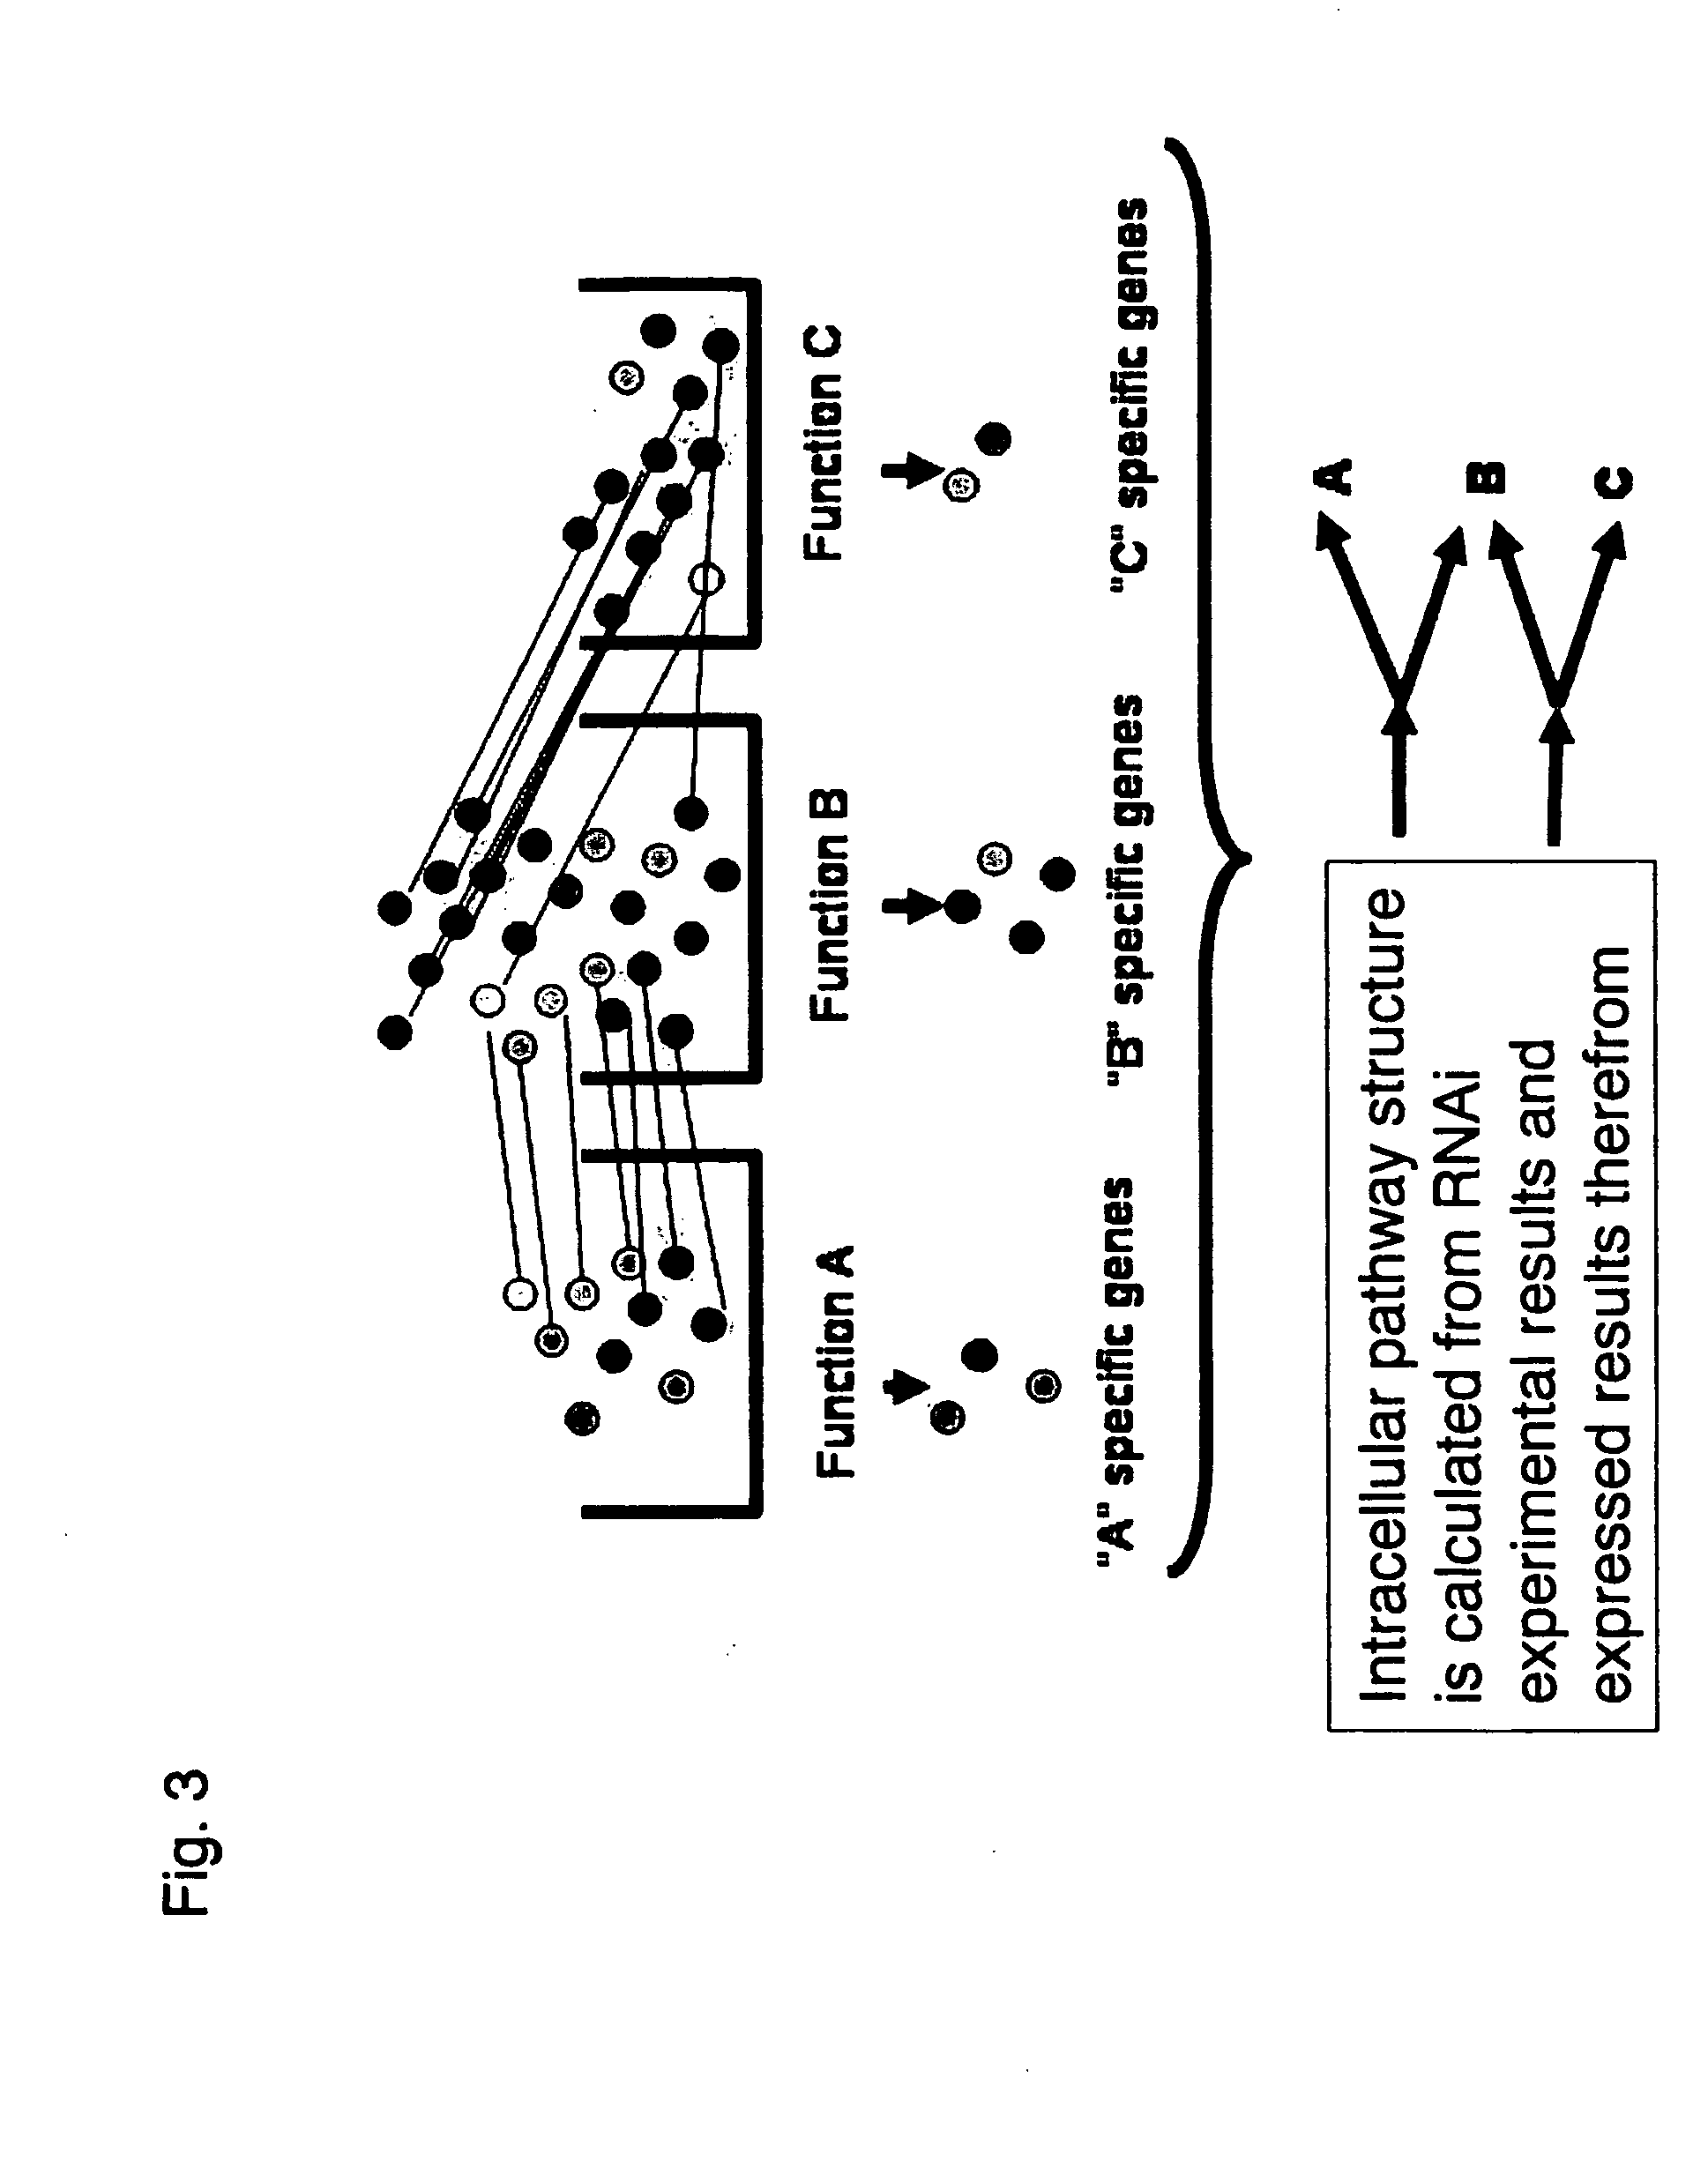 Methods and systems for analyzing a network of biological functions